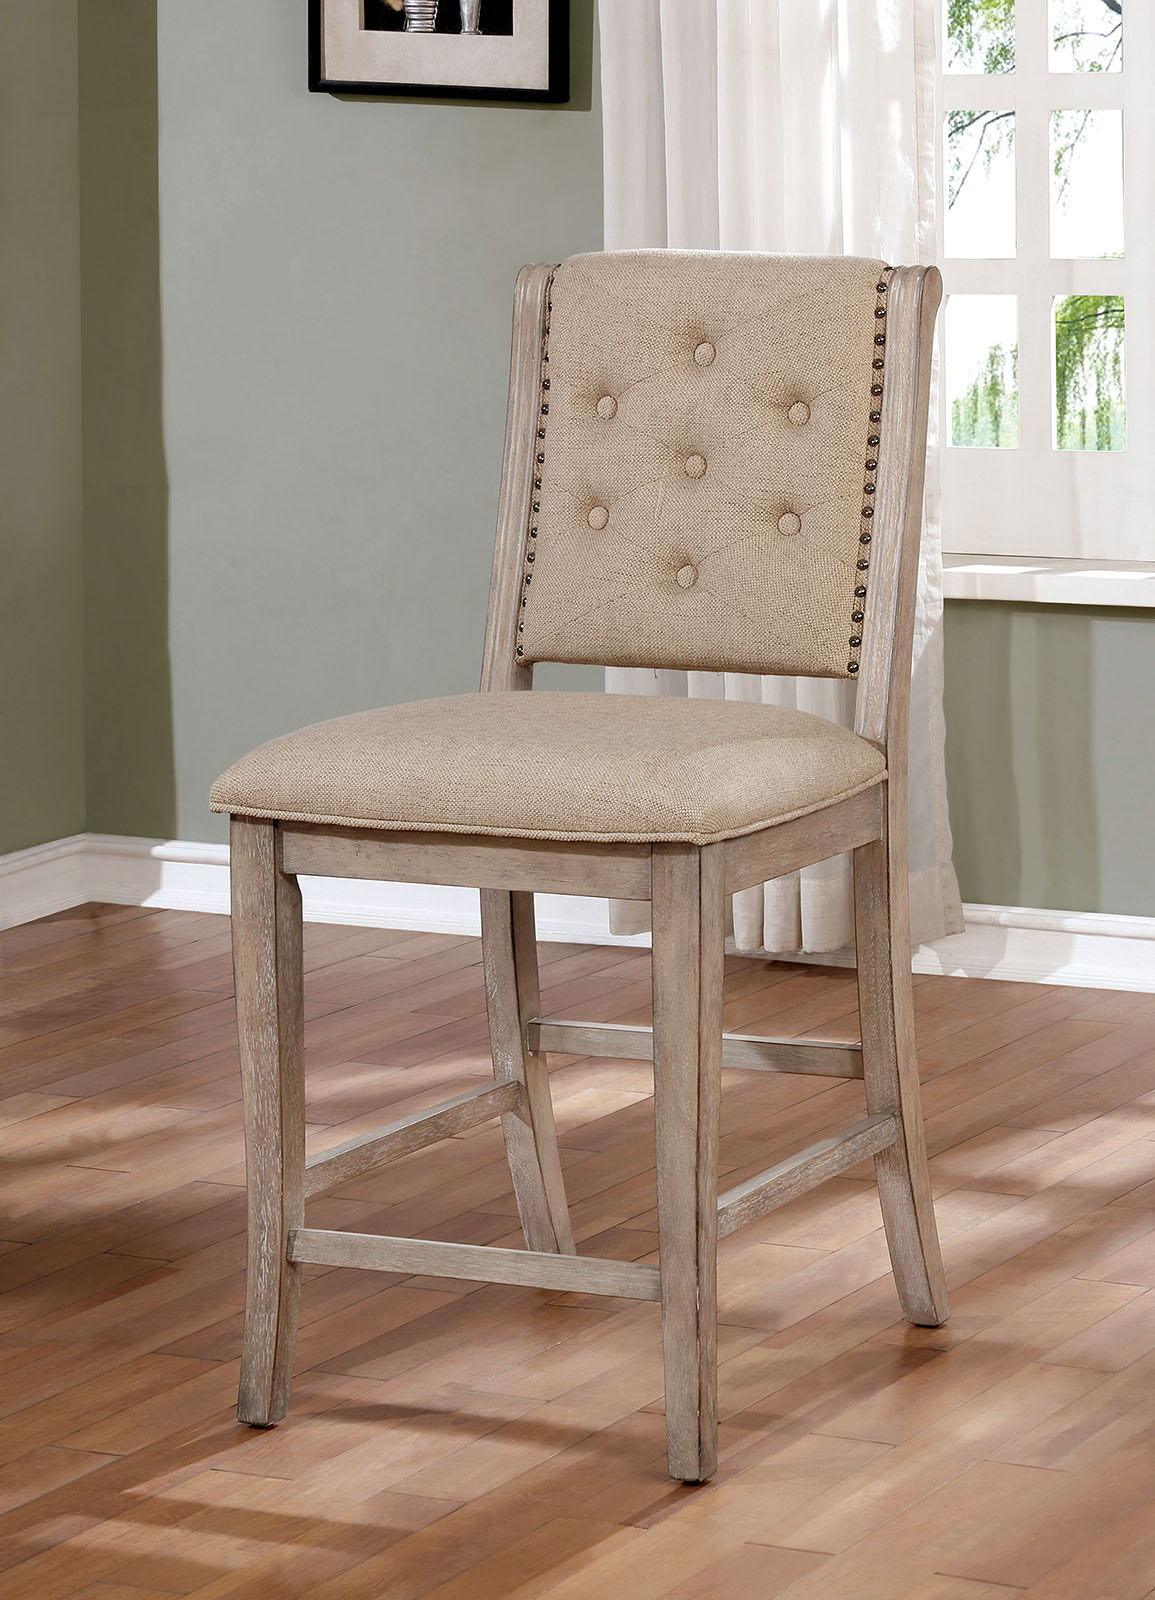 Furniture of America - Ledyard - Counter Height Side Chair (Set of 2) - Rustic Natural Tone - 5th Avenue Furniture